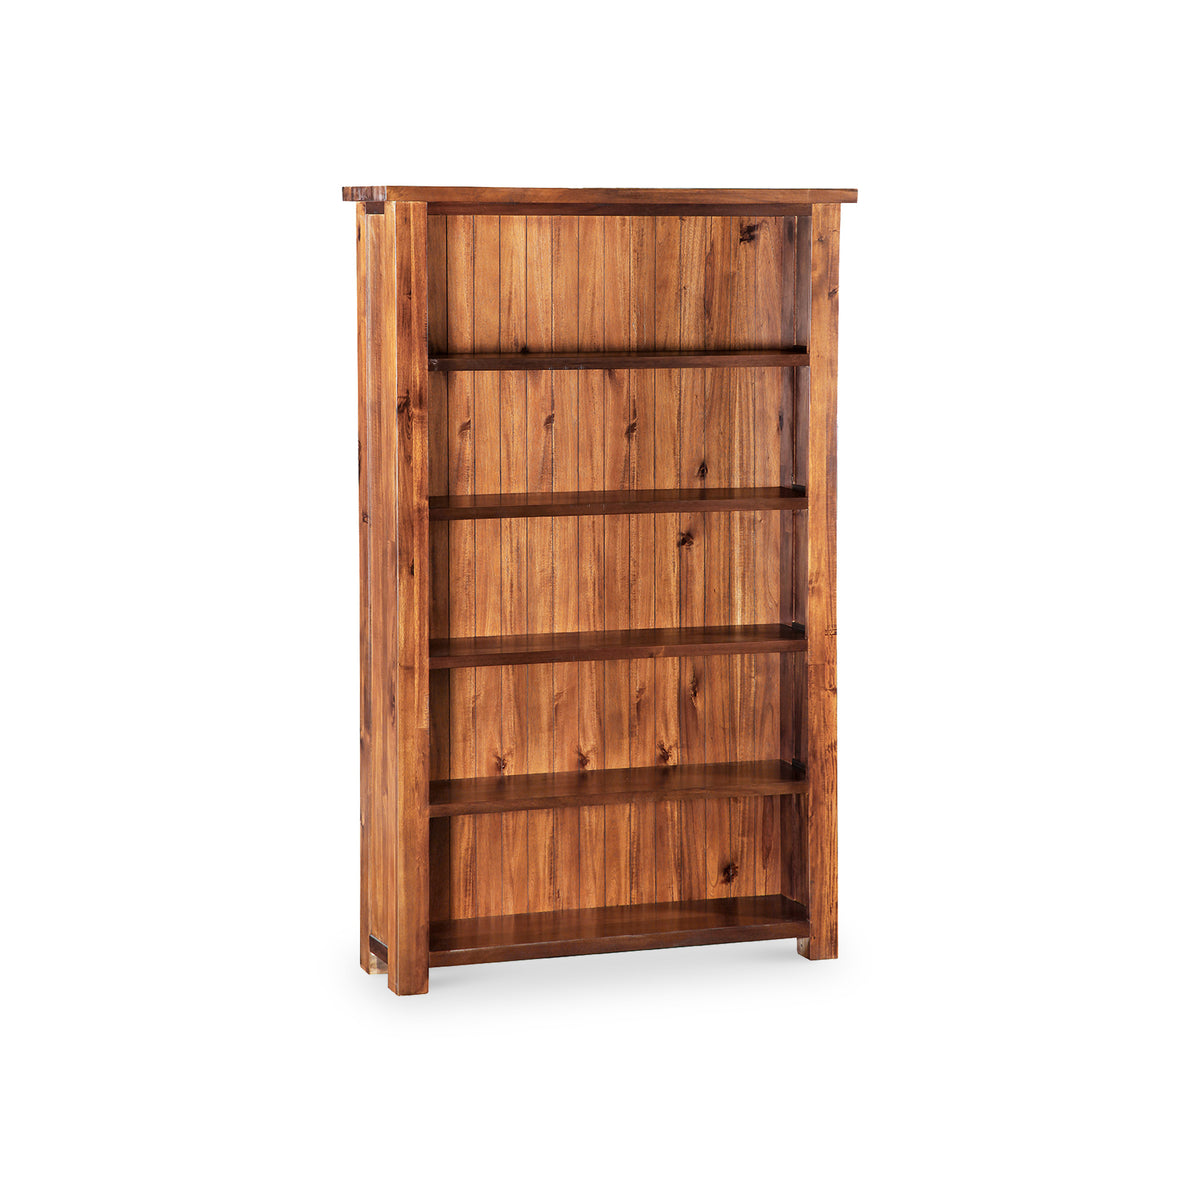 Ladock Acacia Large Bookcase from Roseland Furniture